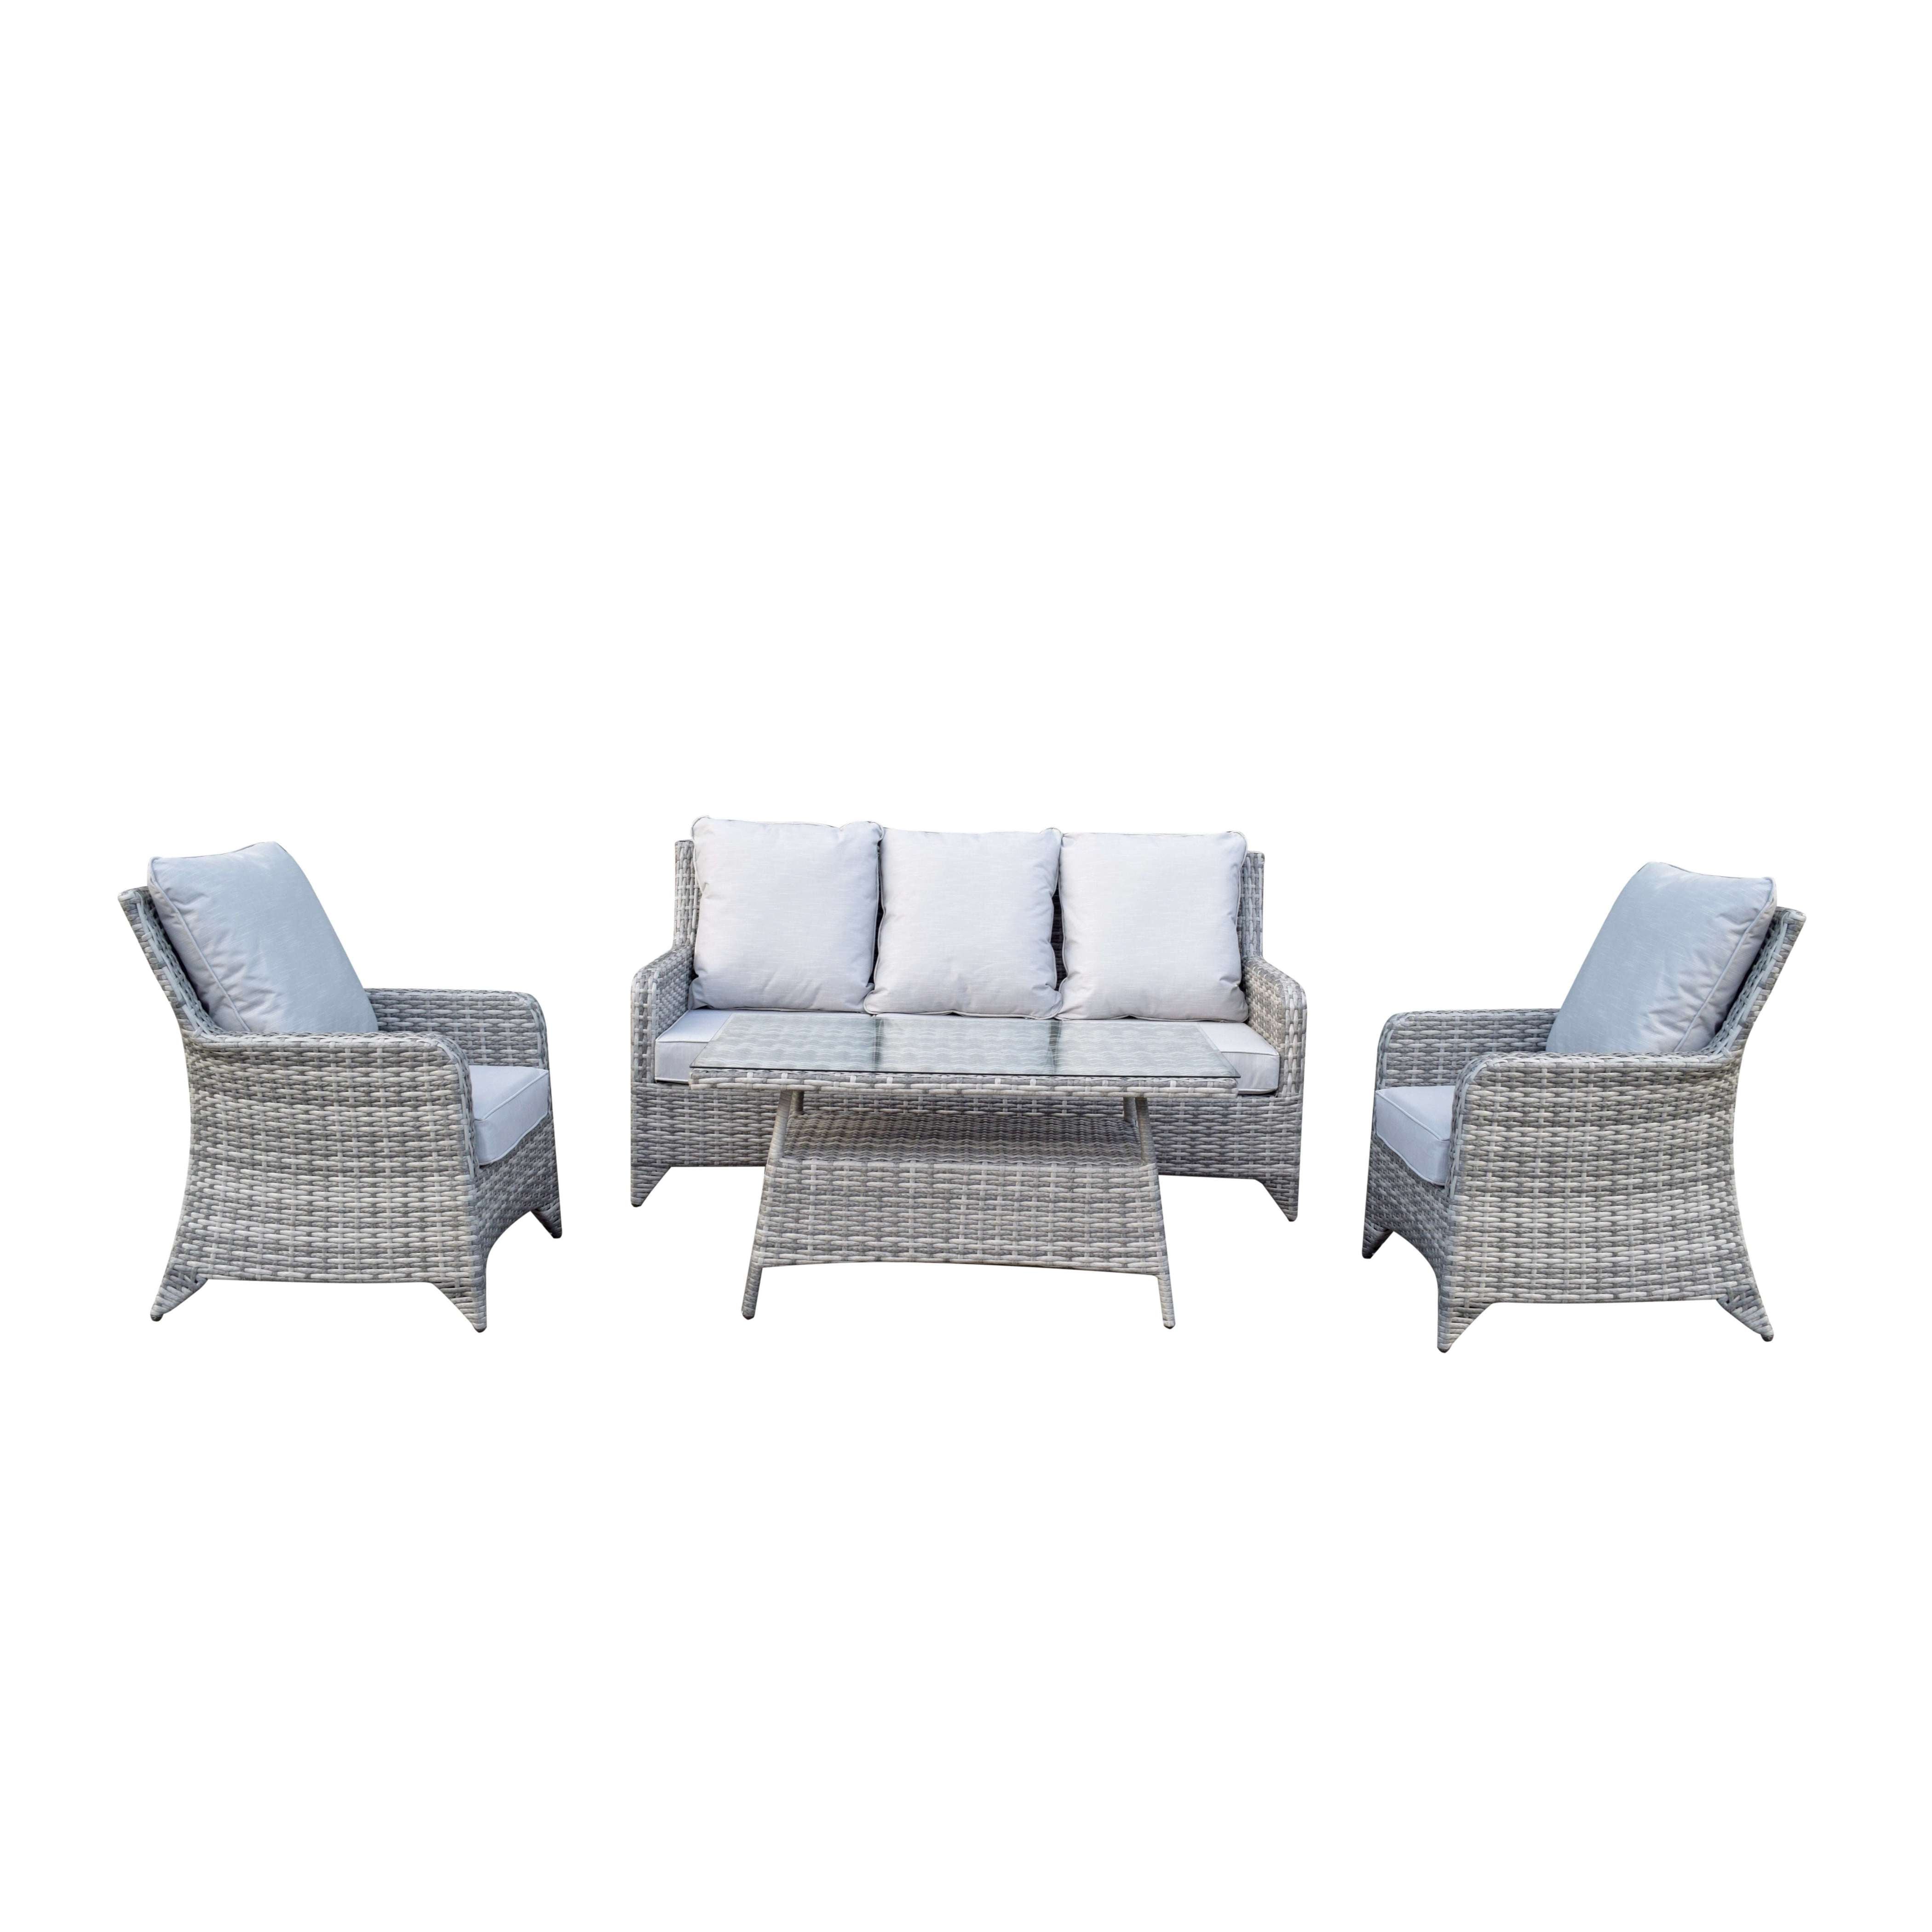 Exceptional Garden:Signature Weave Sarah 5-Seater Sofa Set with New Coffee Table Design - Grey